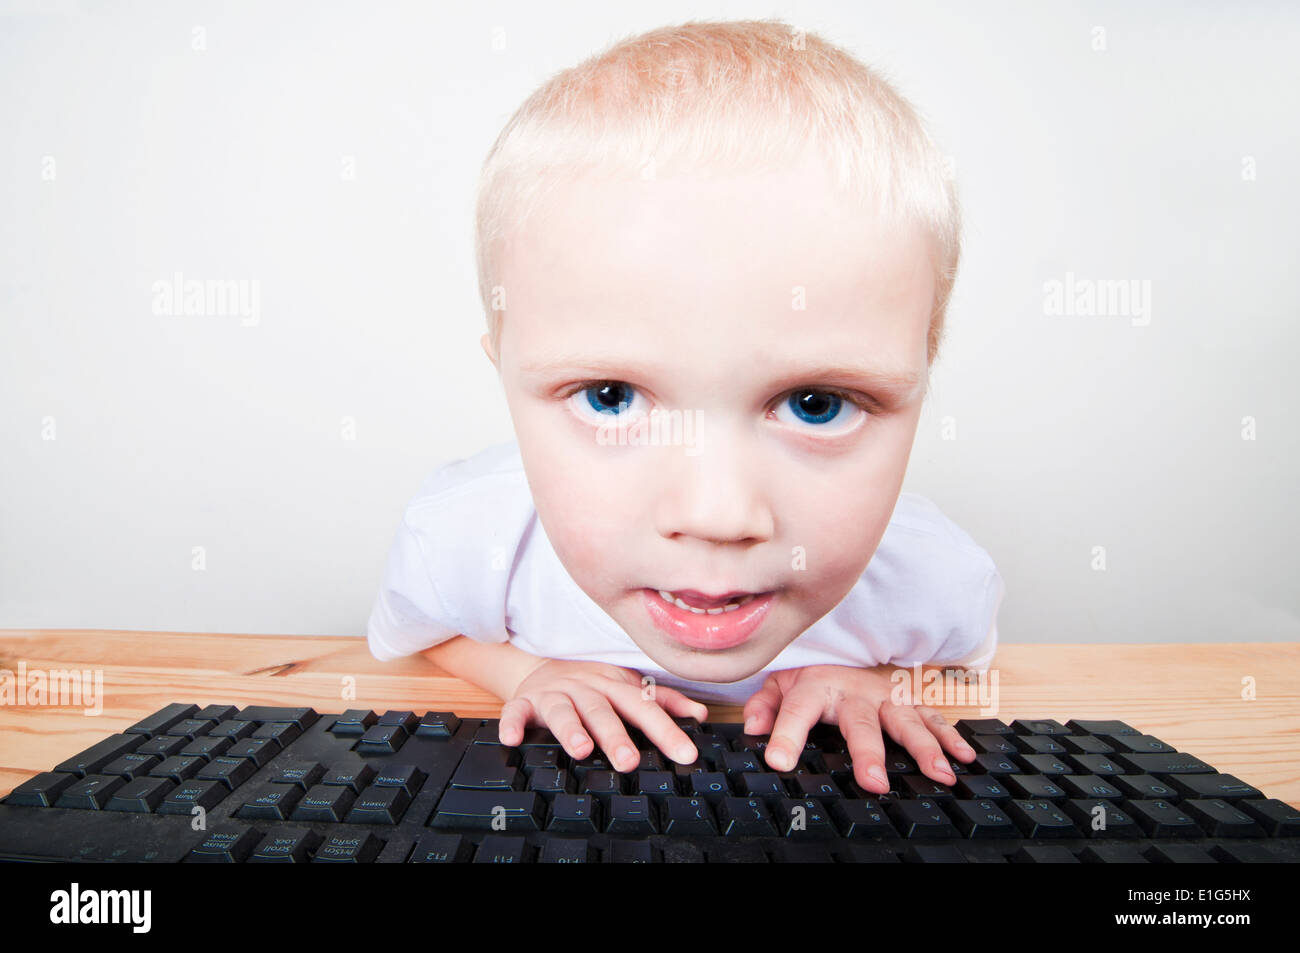 Cute child looking at a computer screen Stock Photo